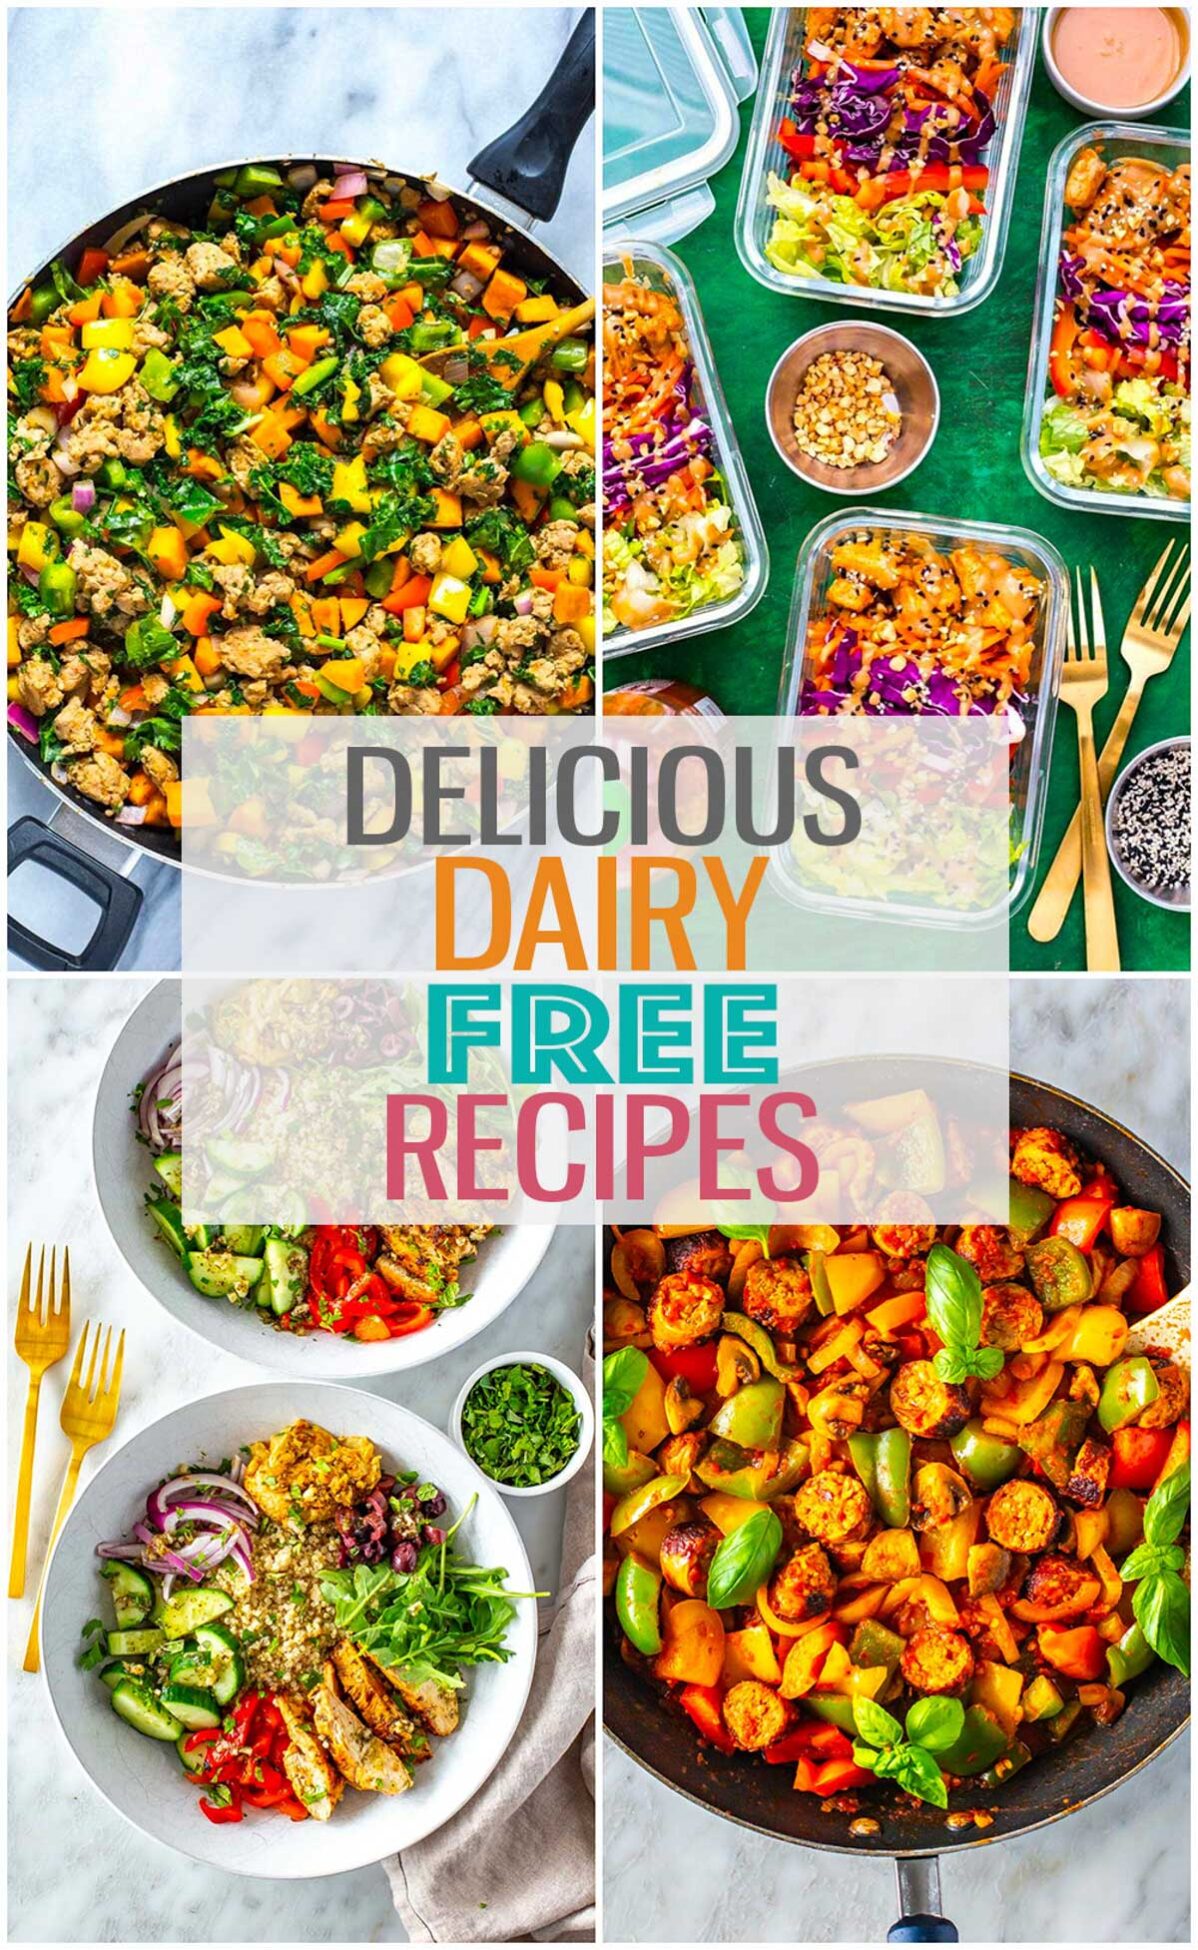 A collage of 4 different dairy-free recipes with the text "Delicious Dairy-Free Recipes" layered over top.